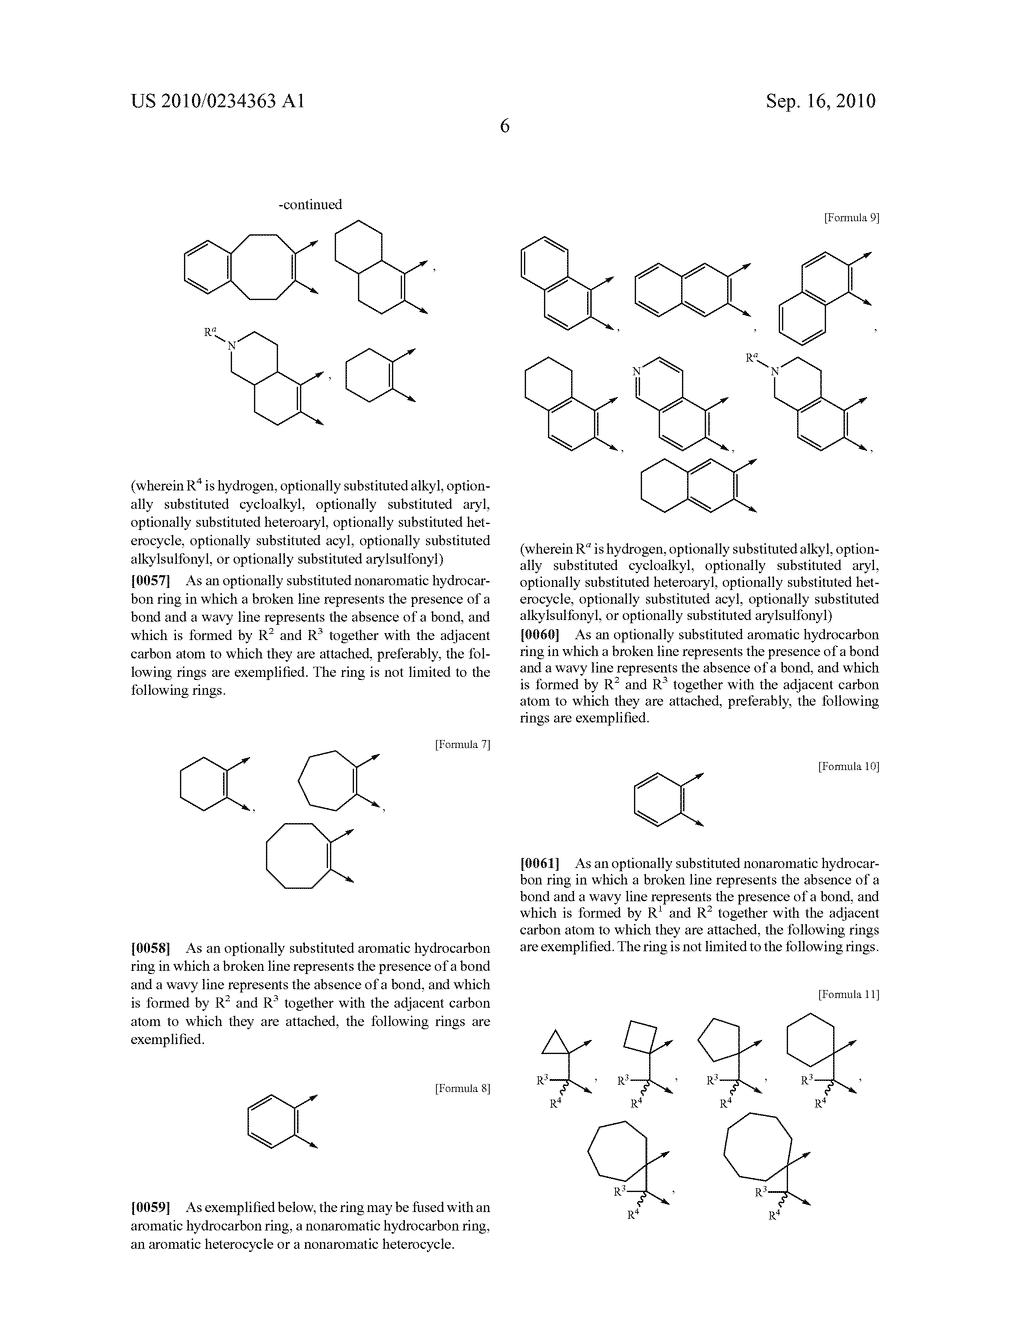 HETEROCYCLIC DERIVATIVE HAVING INHIBITORY ACTIVITY ON TYPE-I 11 DATA-HYDROXYSTEROID DEHYDROGENASE - diagram, schematic, and image 07